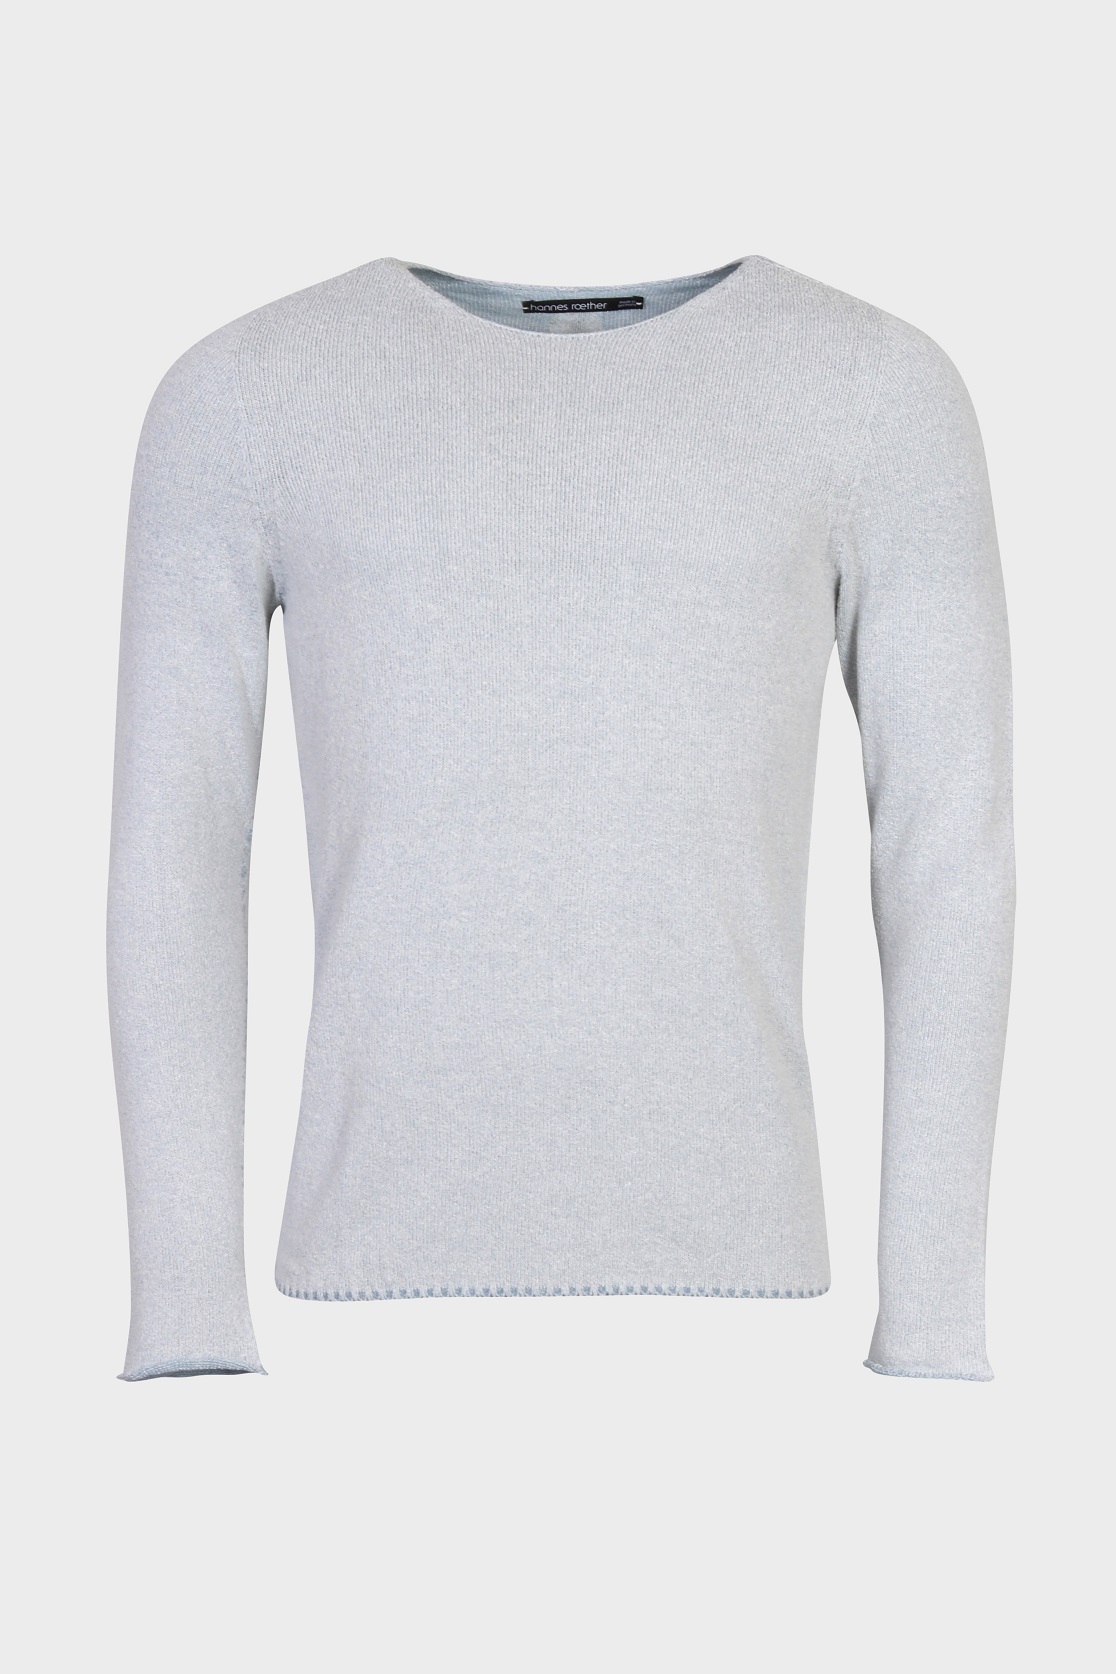 HANNES ROETHER Knit Sweater in Light Blue XL